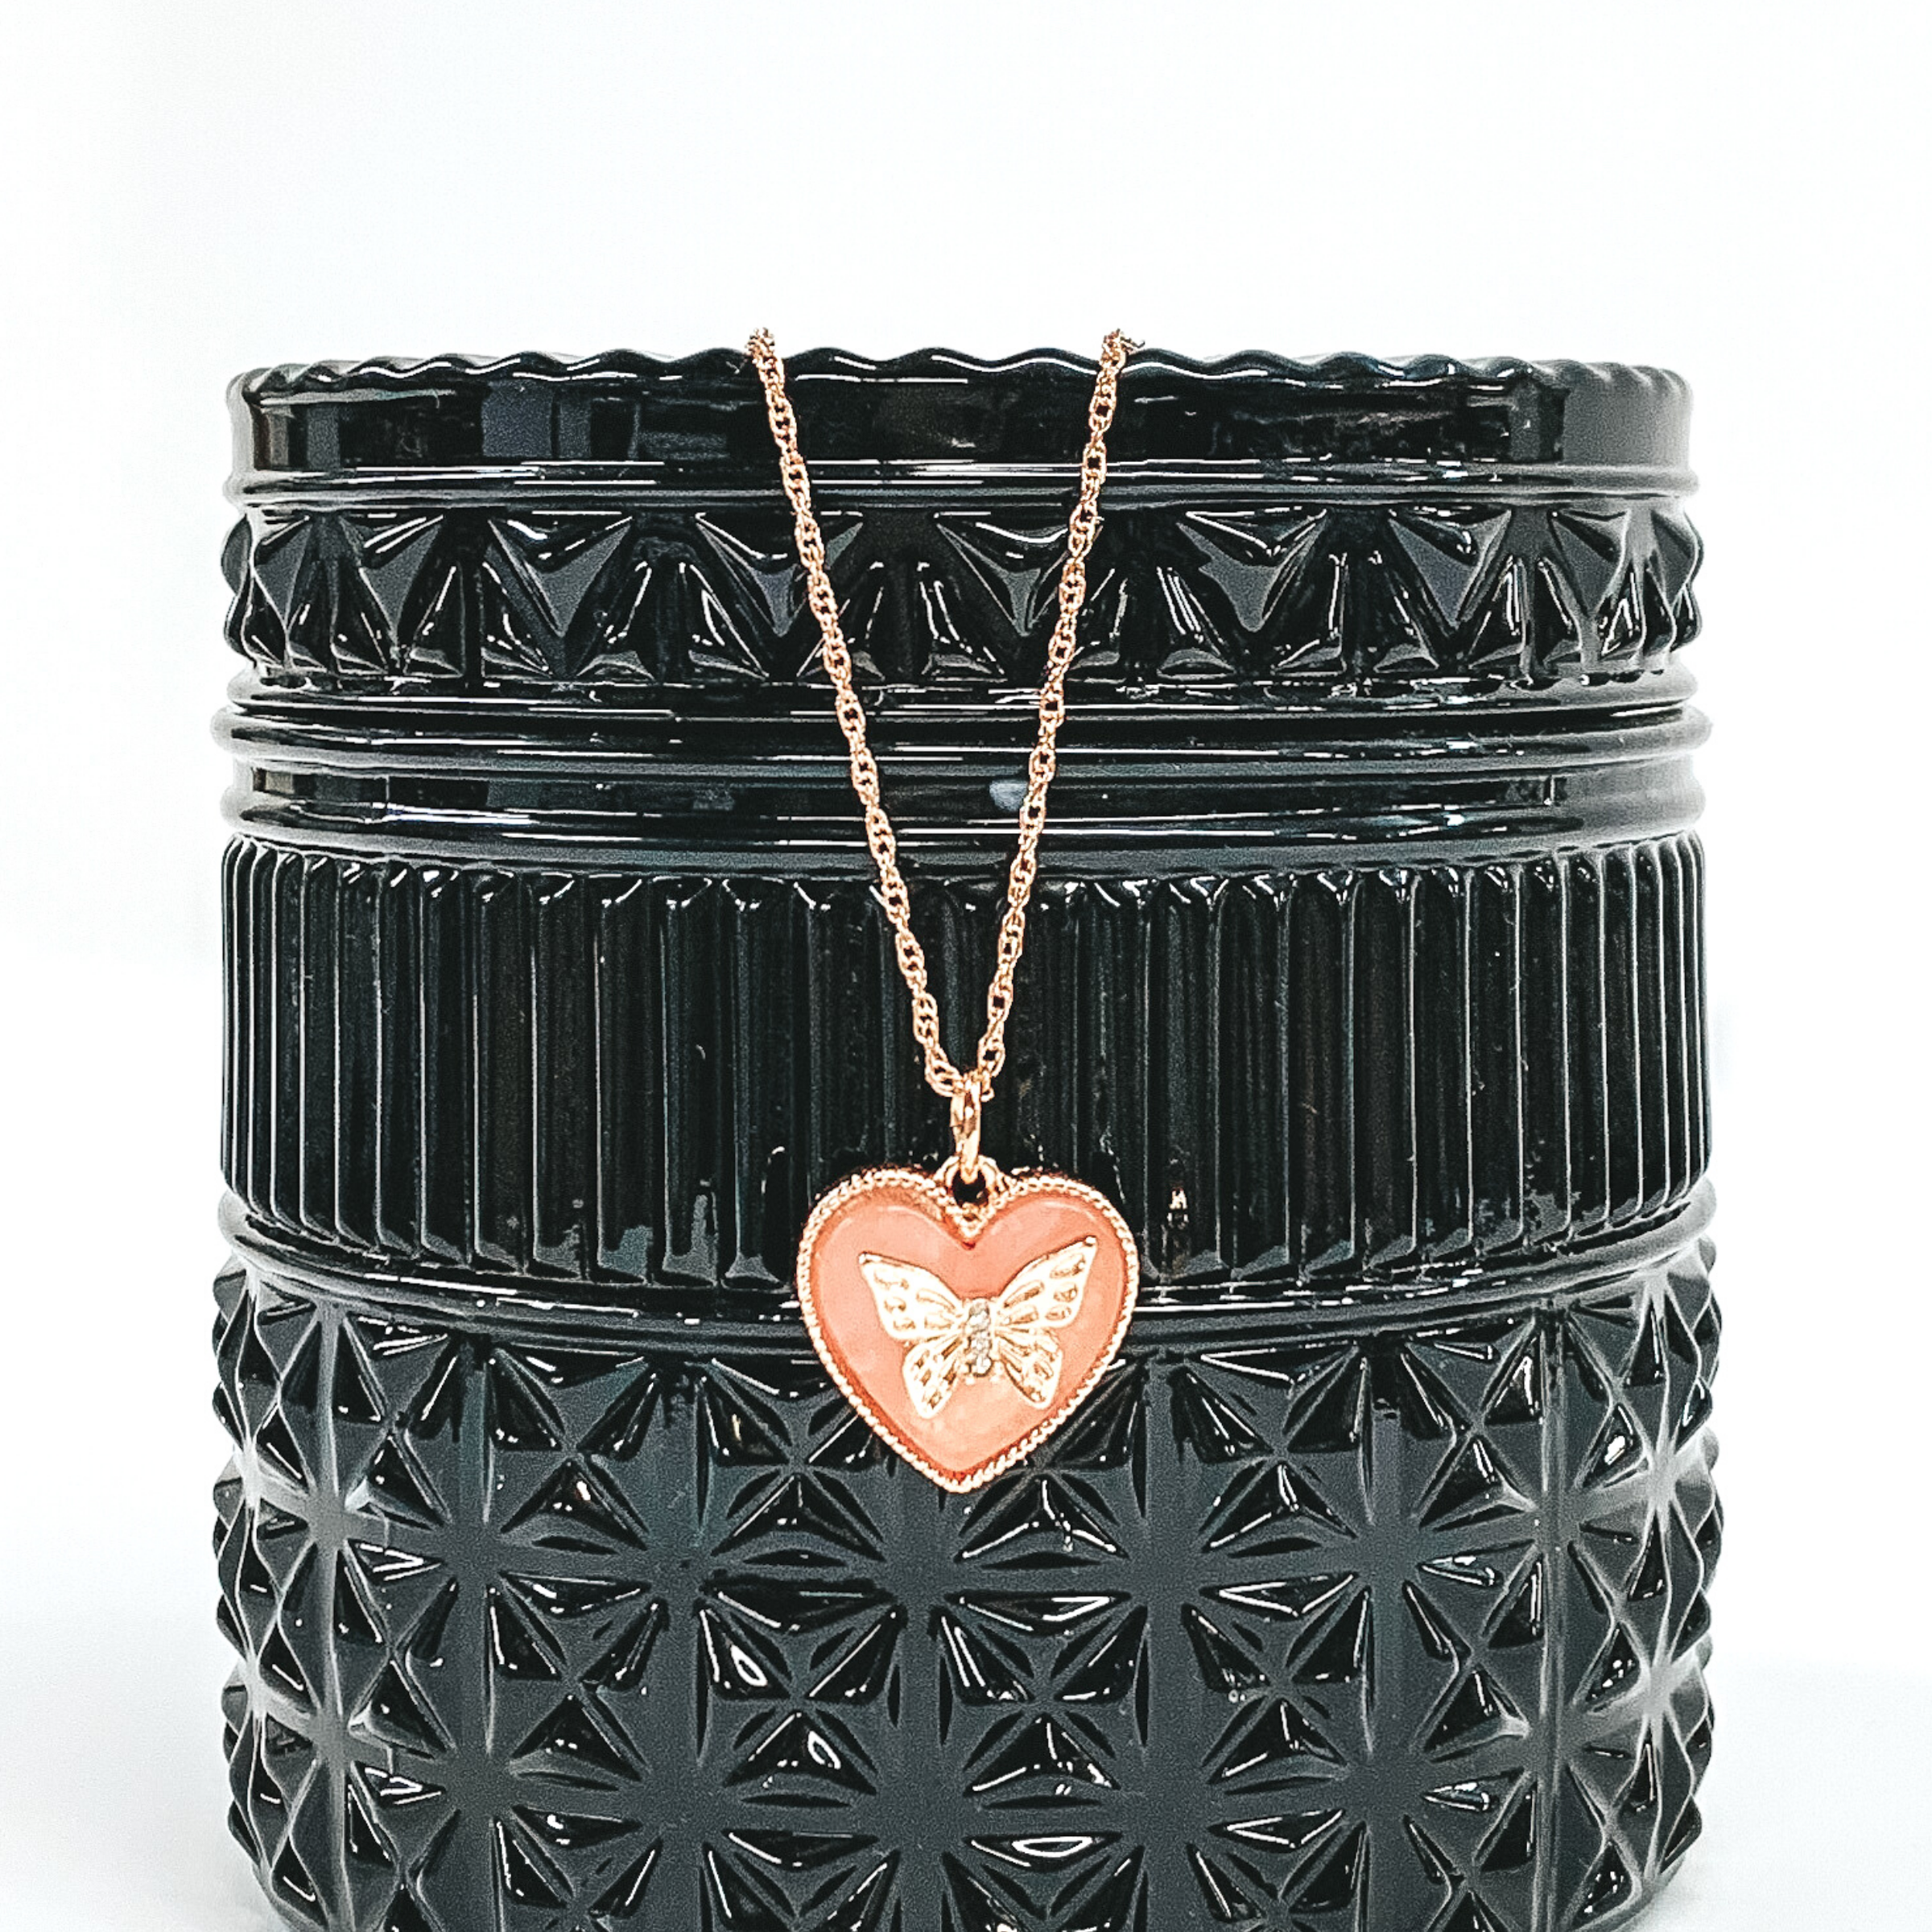 Gold necklace with blush colored heart pendant. The heart pendant has a gold butterfly charm in the center. The necklaces is pictured of a a black container that is in front of a white background. 